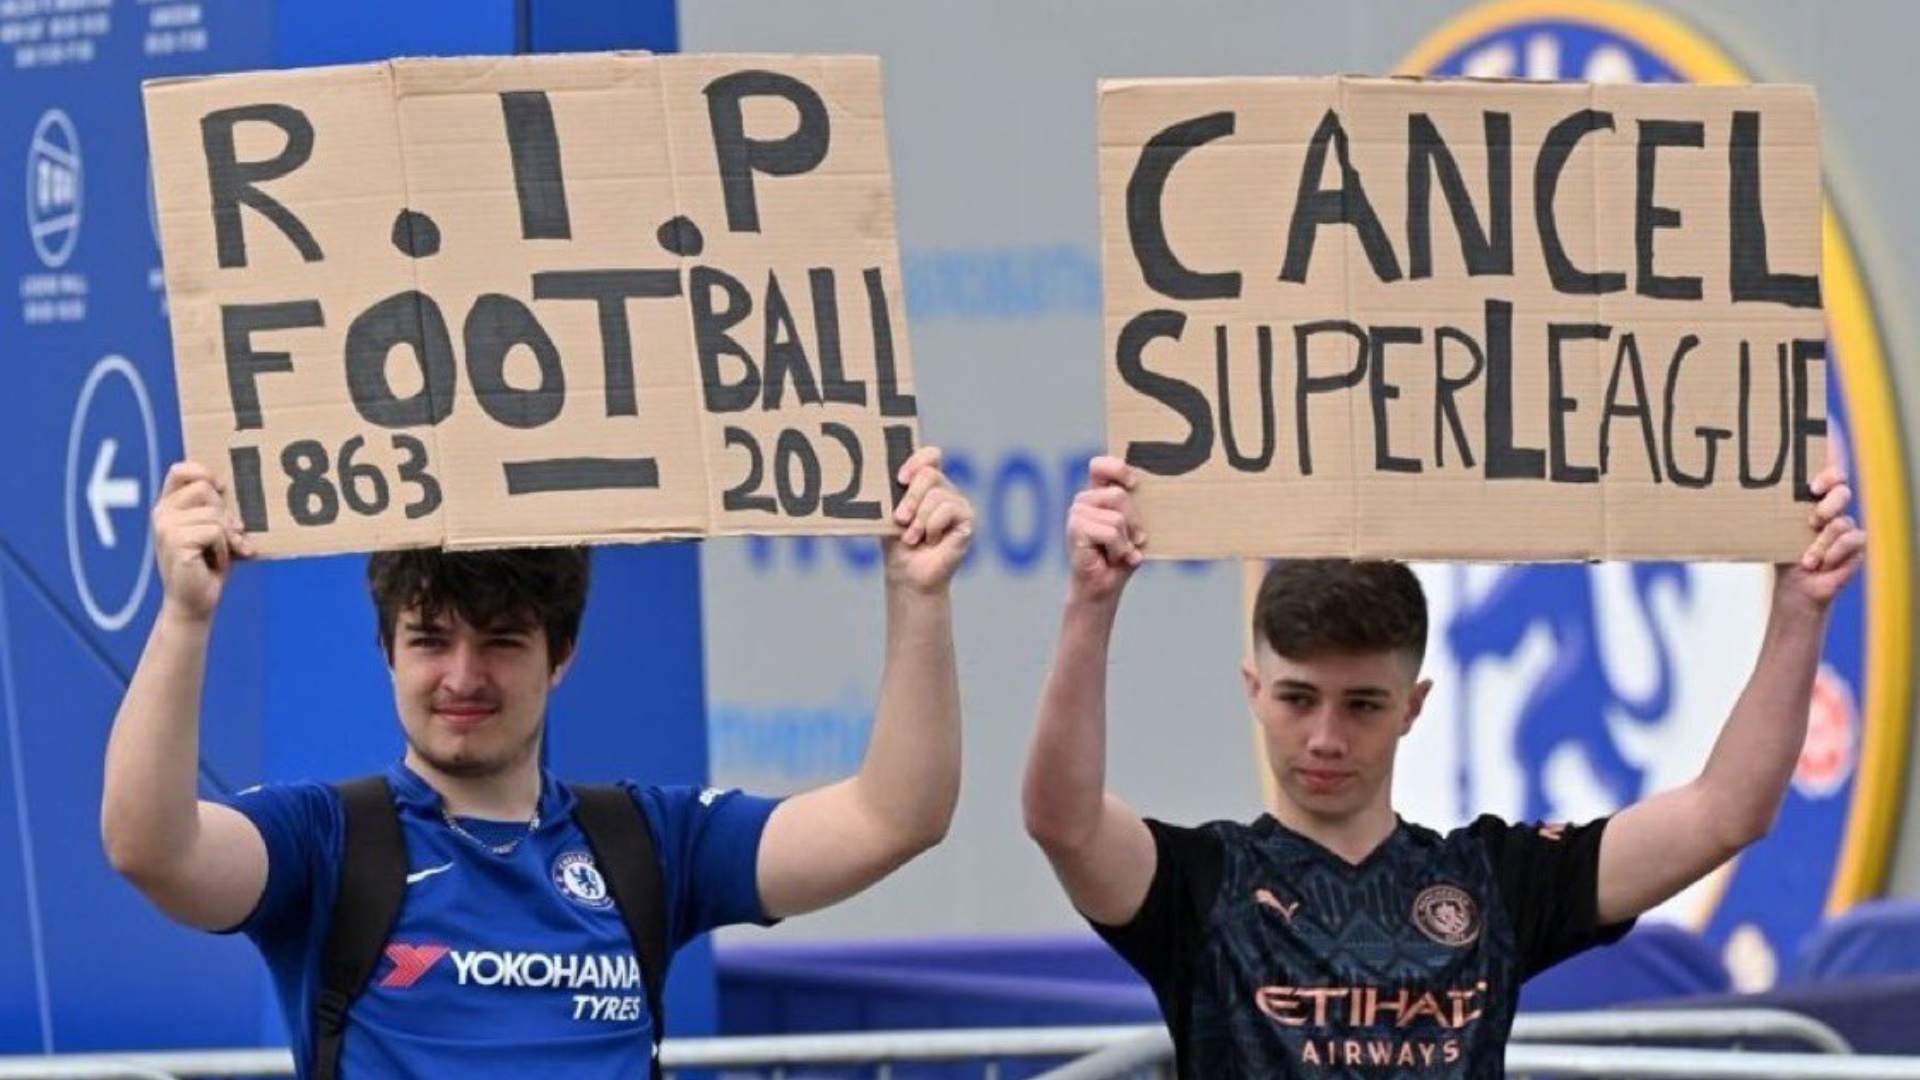 The European Super League has now been suspended after the withdrawal of the six Premier League clubs.